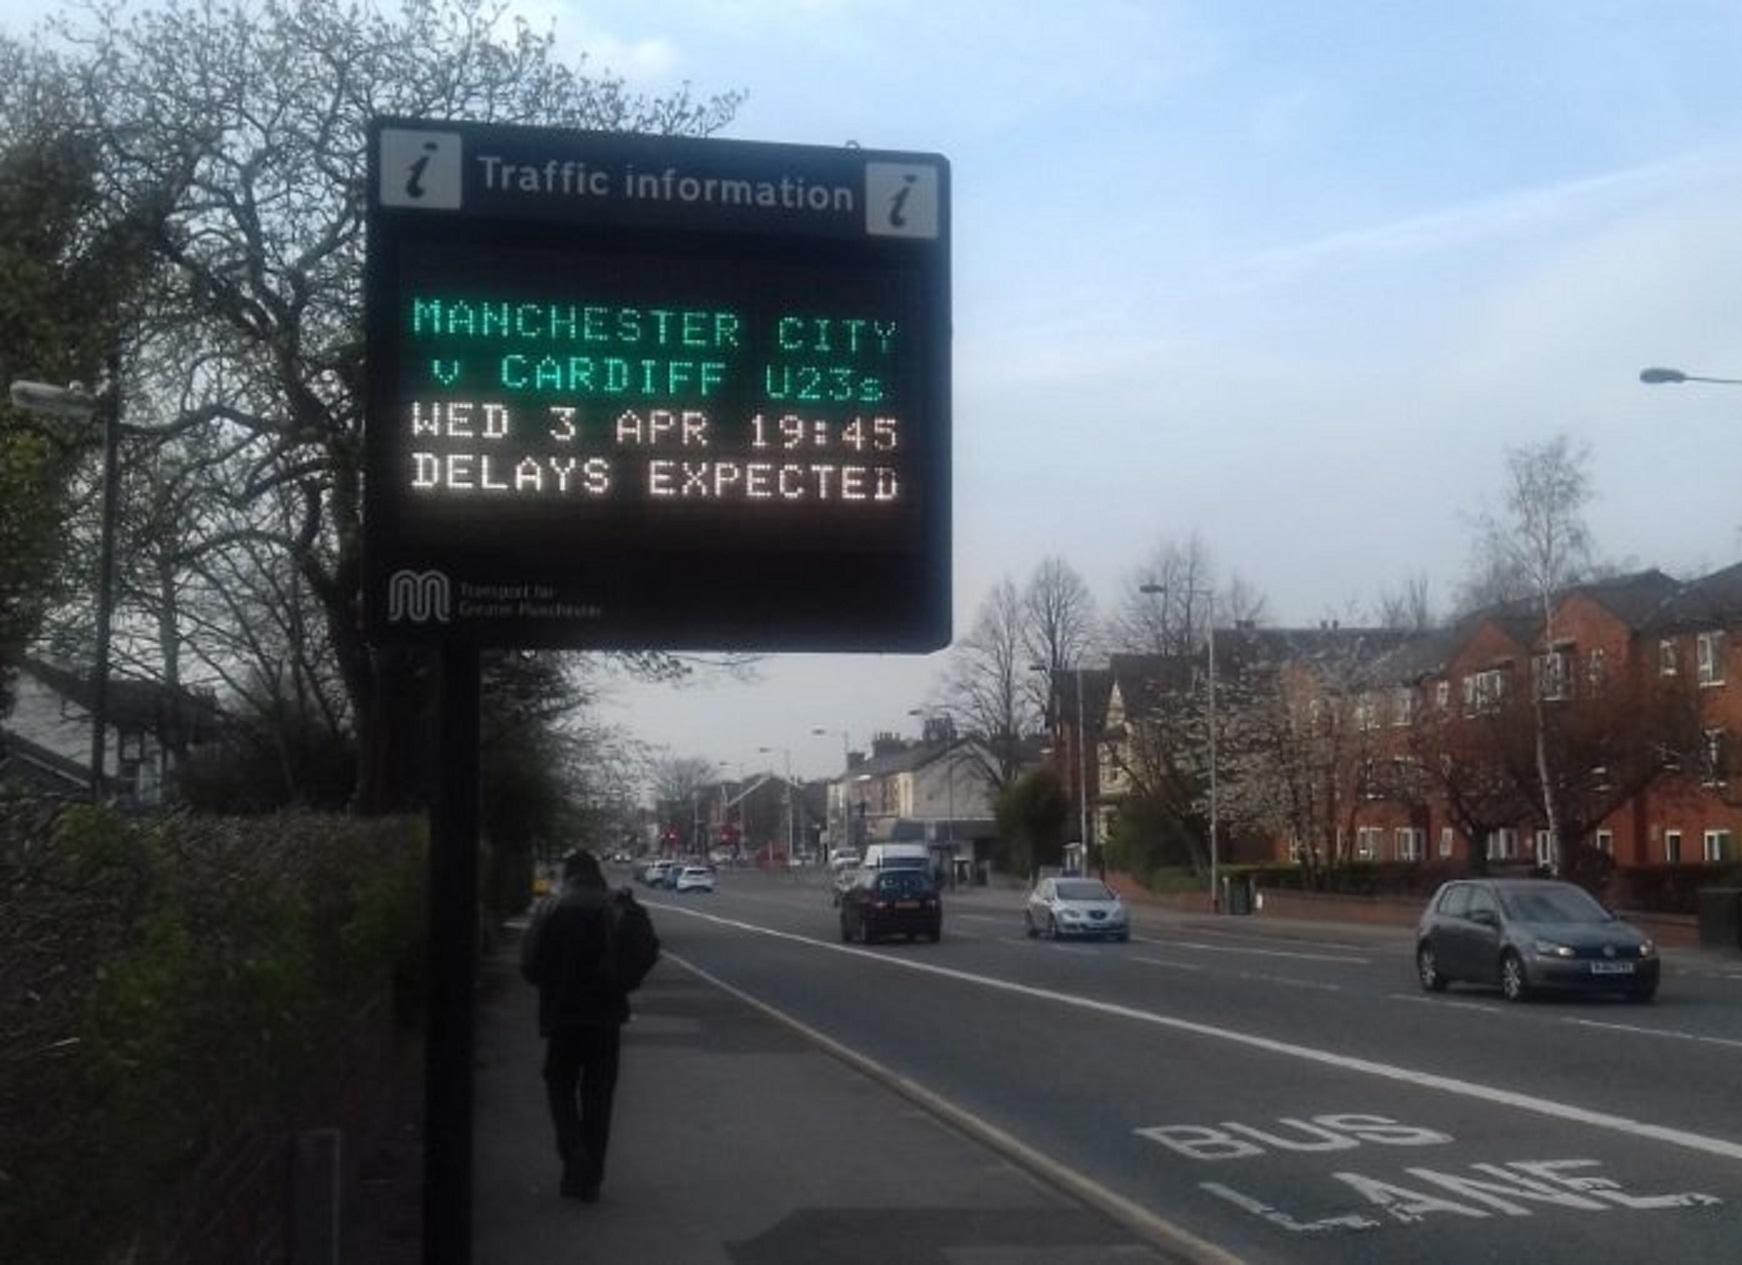 A sign in Stockport ahead of Manchester City's game against Cardiff City